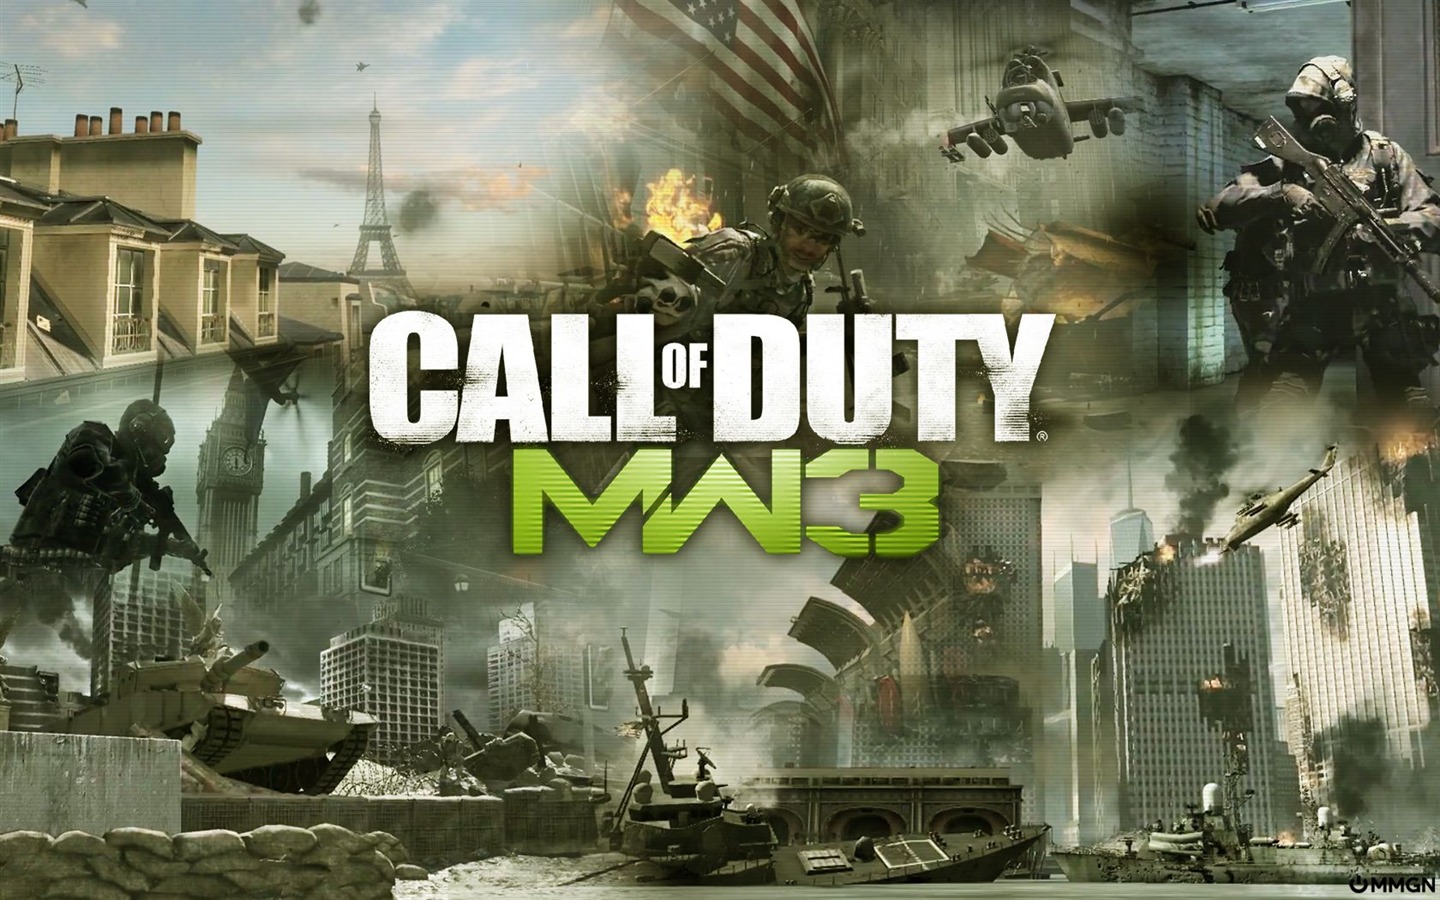 Call of Duty: MW3 HD wallpapers #5 - 1440x900